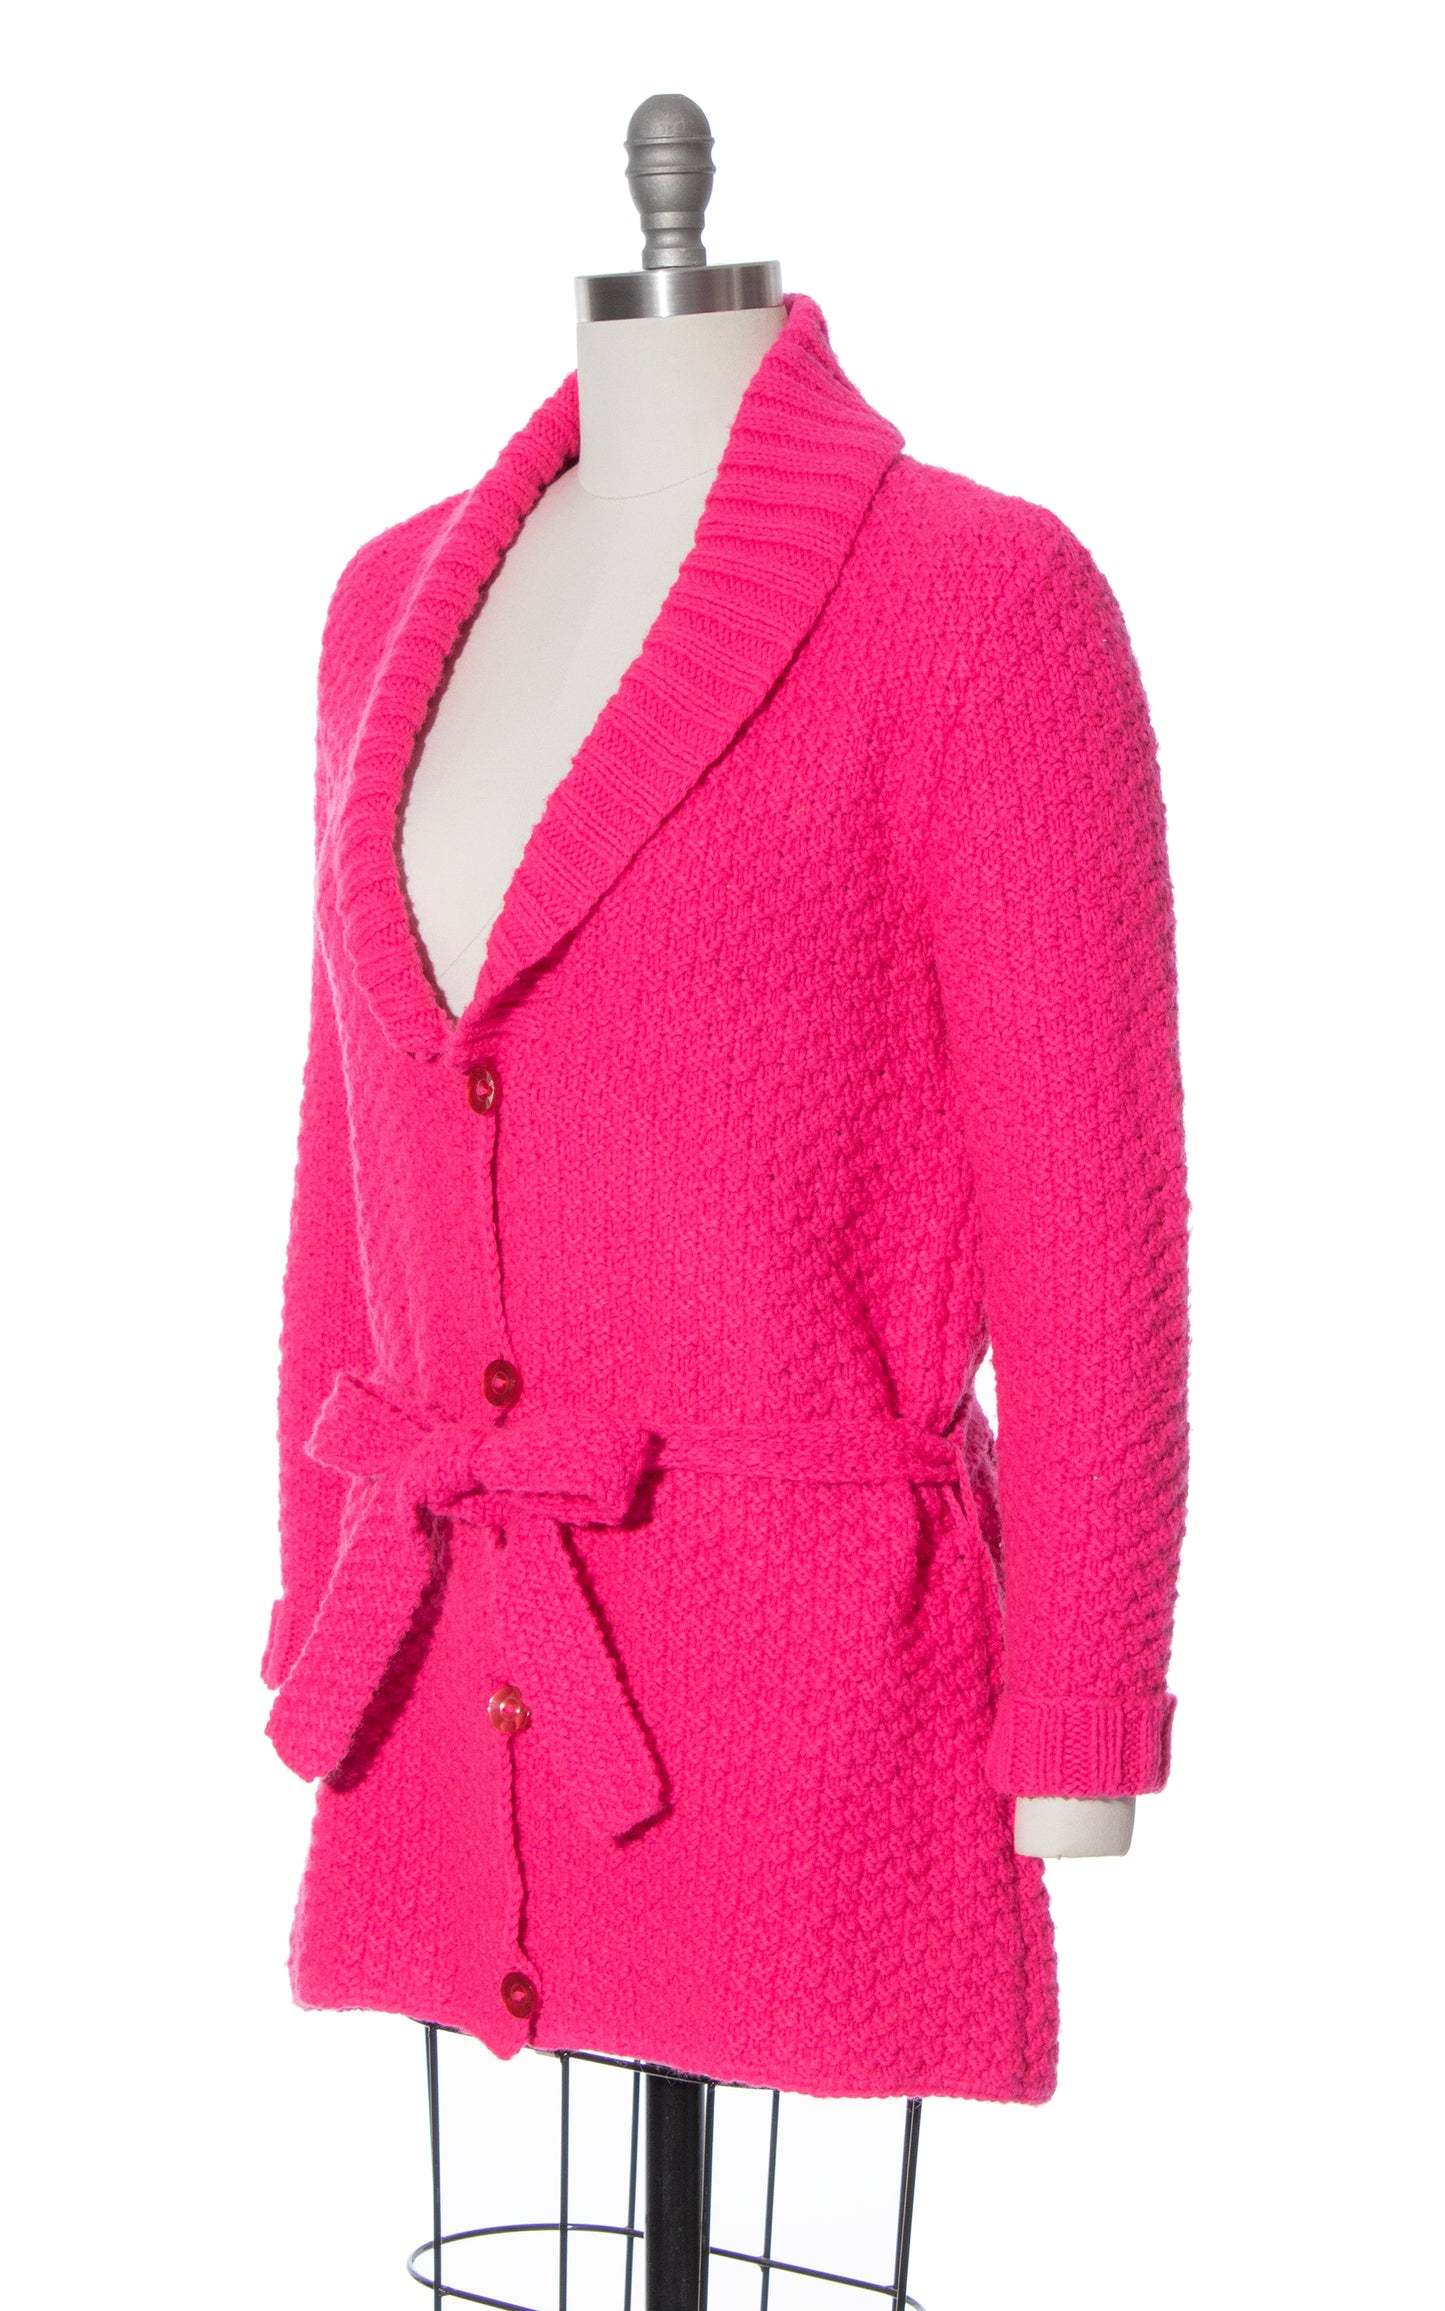 VIntage 70s 1970s Hot Pink Knit Belted Cardigan Acrylic Sweater Coat BirthdayLifeVintage